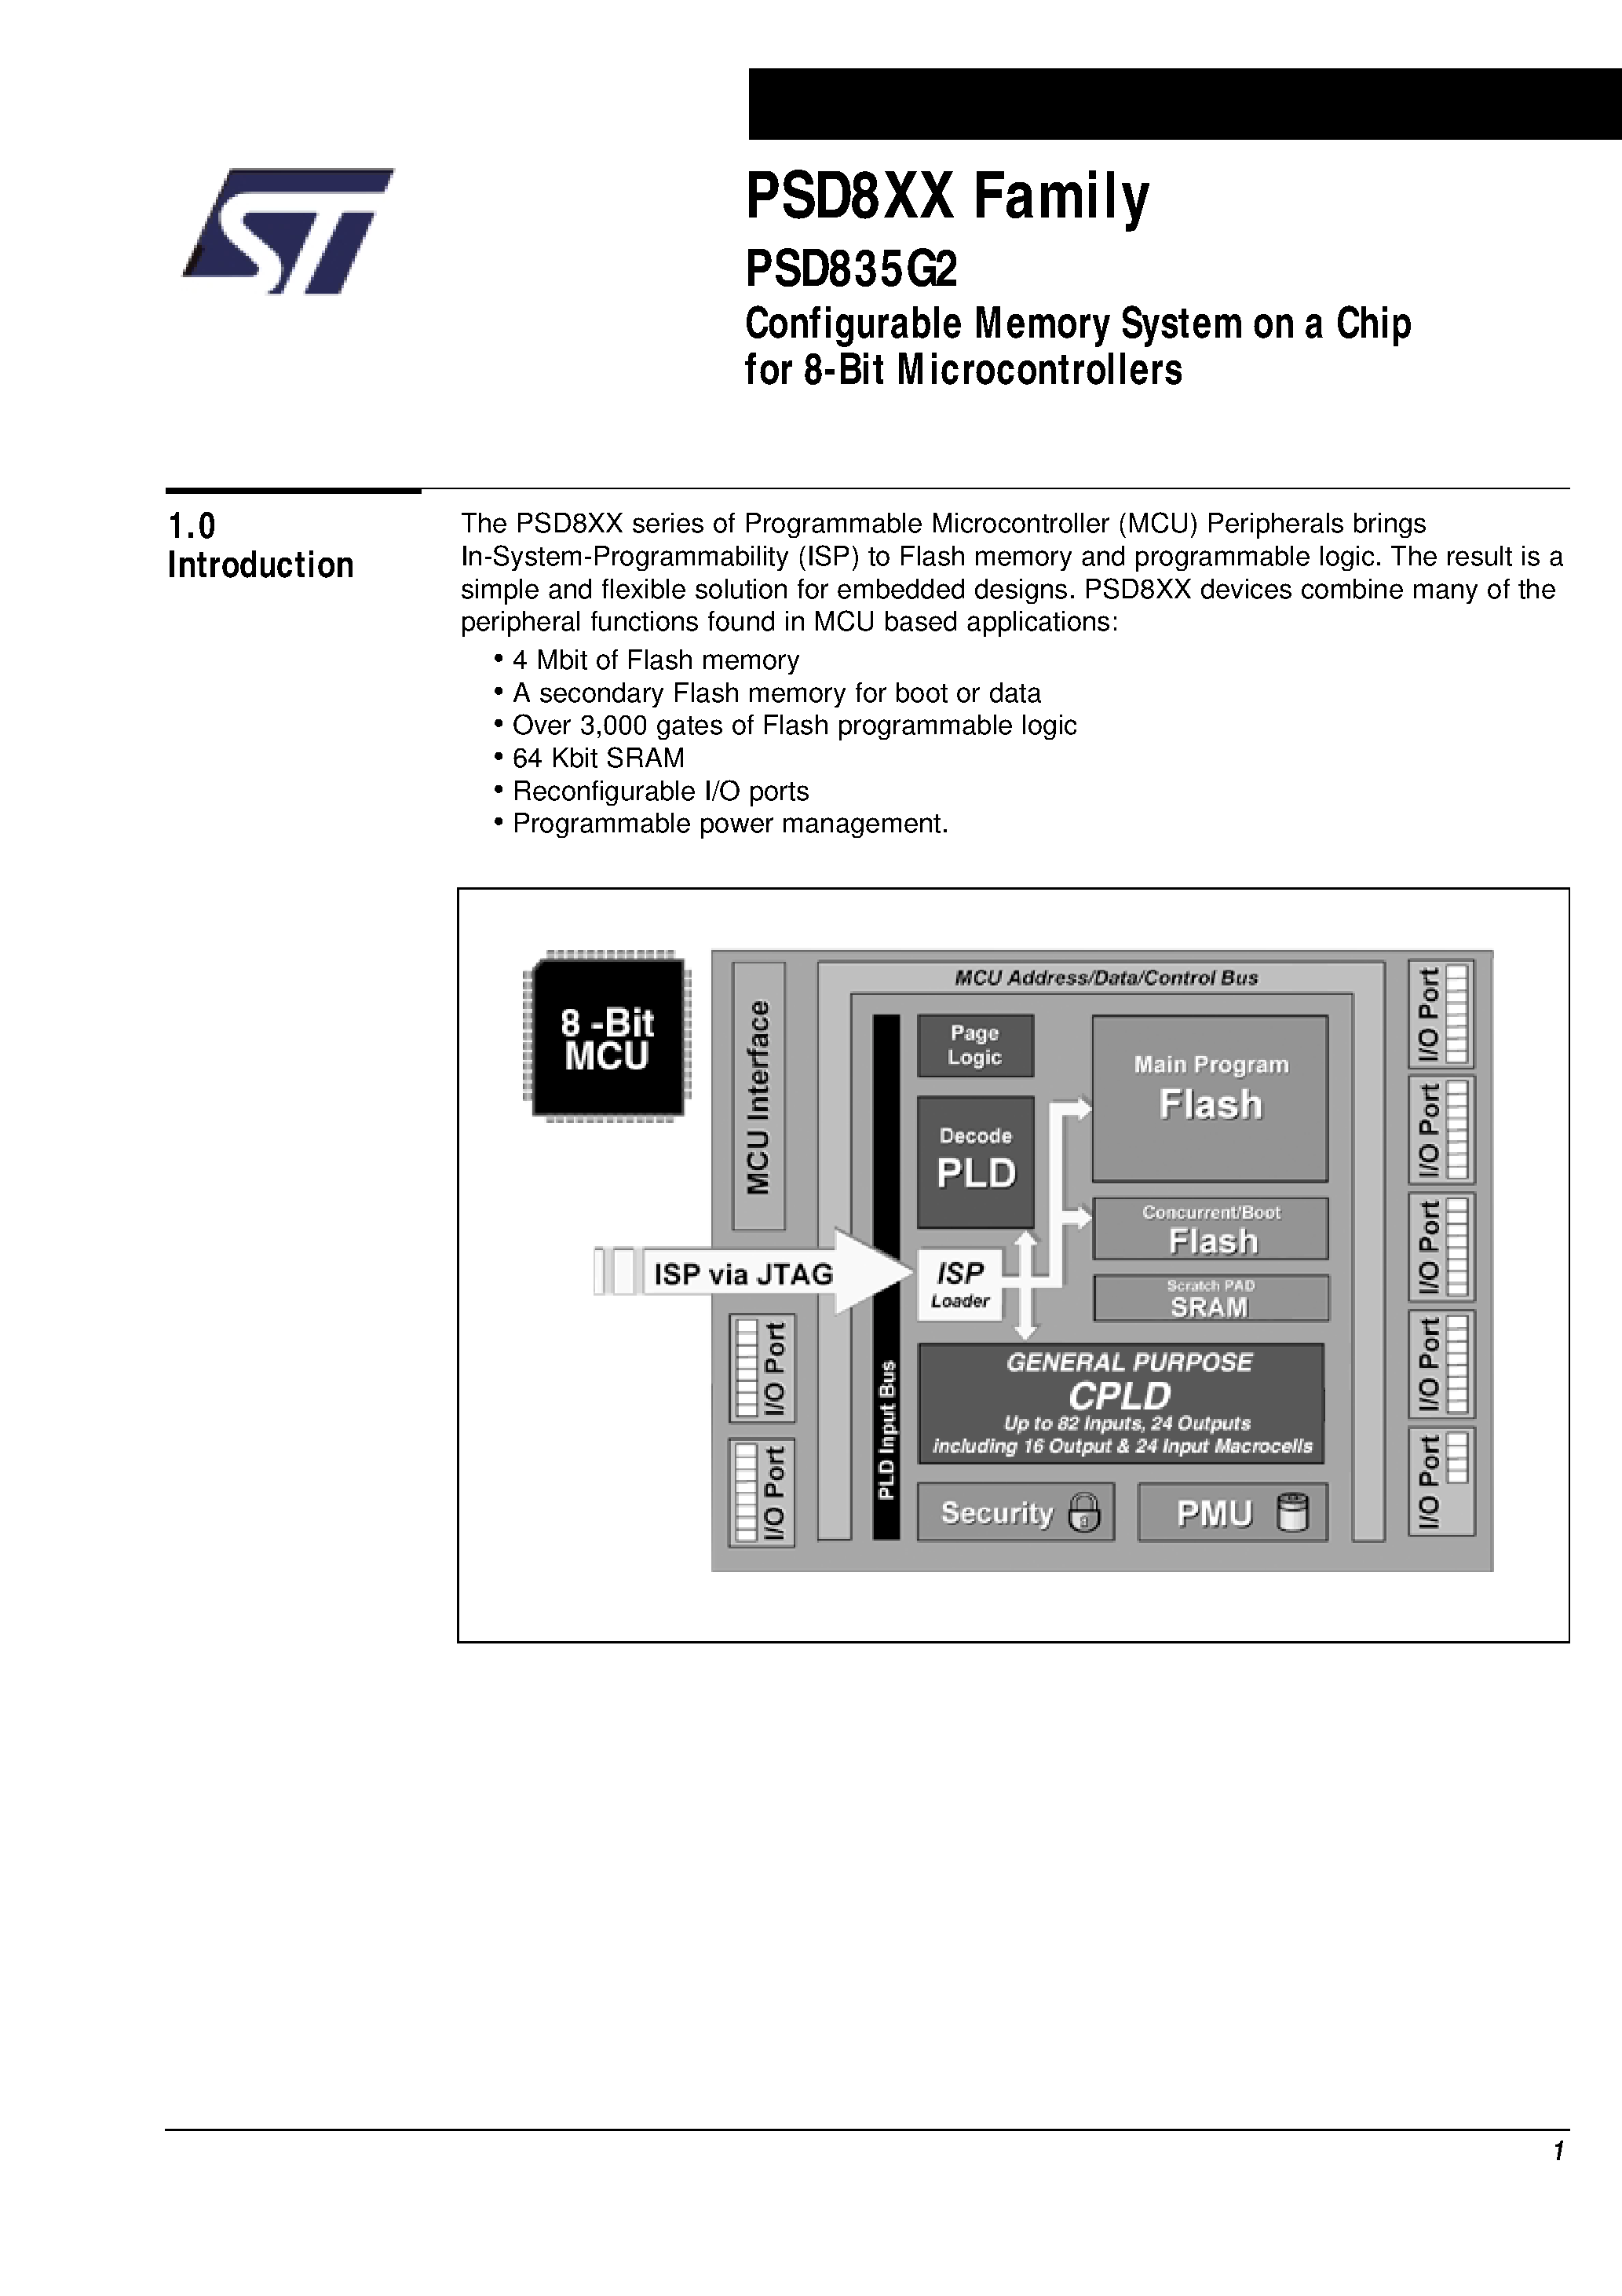 Datasheet PSD835F2-A-12JI - Configurable Memory System on a Chip for 8-Bit Microcontrollers page 2